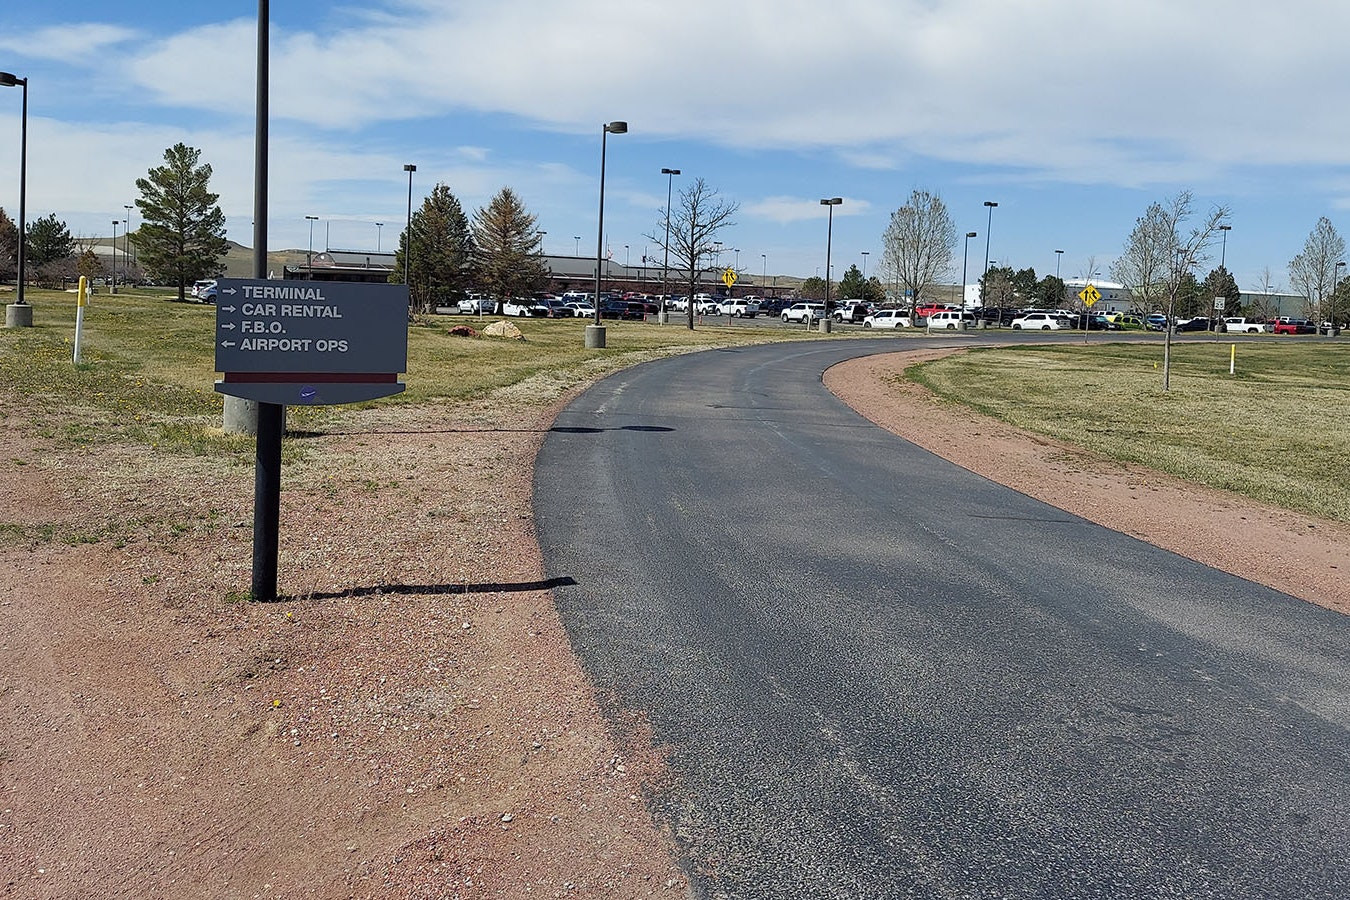 The main entrance to the Northeast Wyoming Regional Airport in Gillette is Airport Road, which then diverges into four other roads all also named Airport Road.